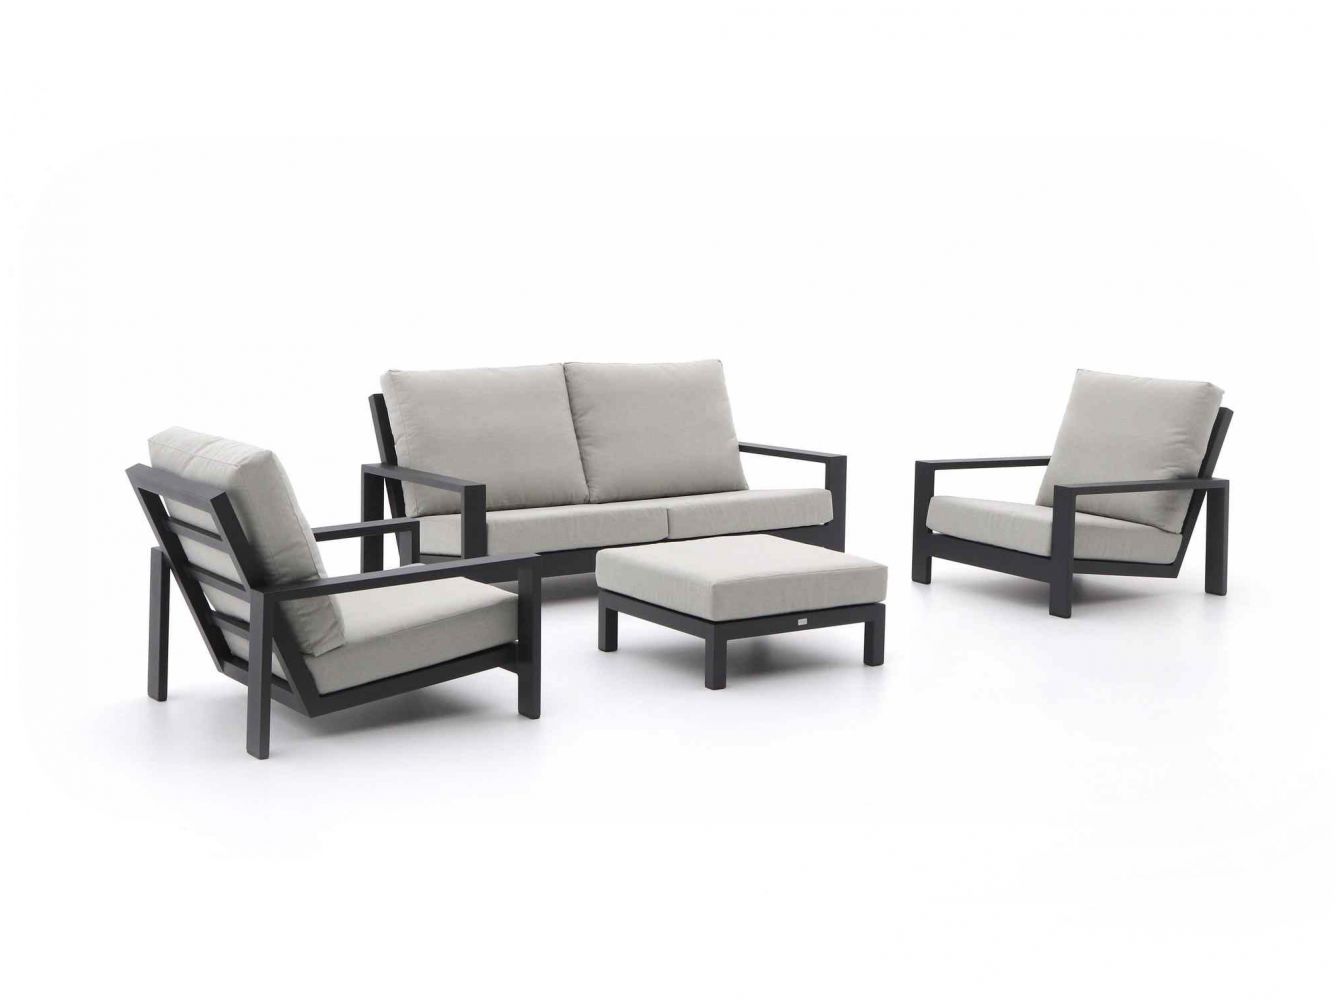 Bellagio stoel-bank loungeset 4-delig - Charcoal (incl. kussens) - Kees Smit